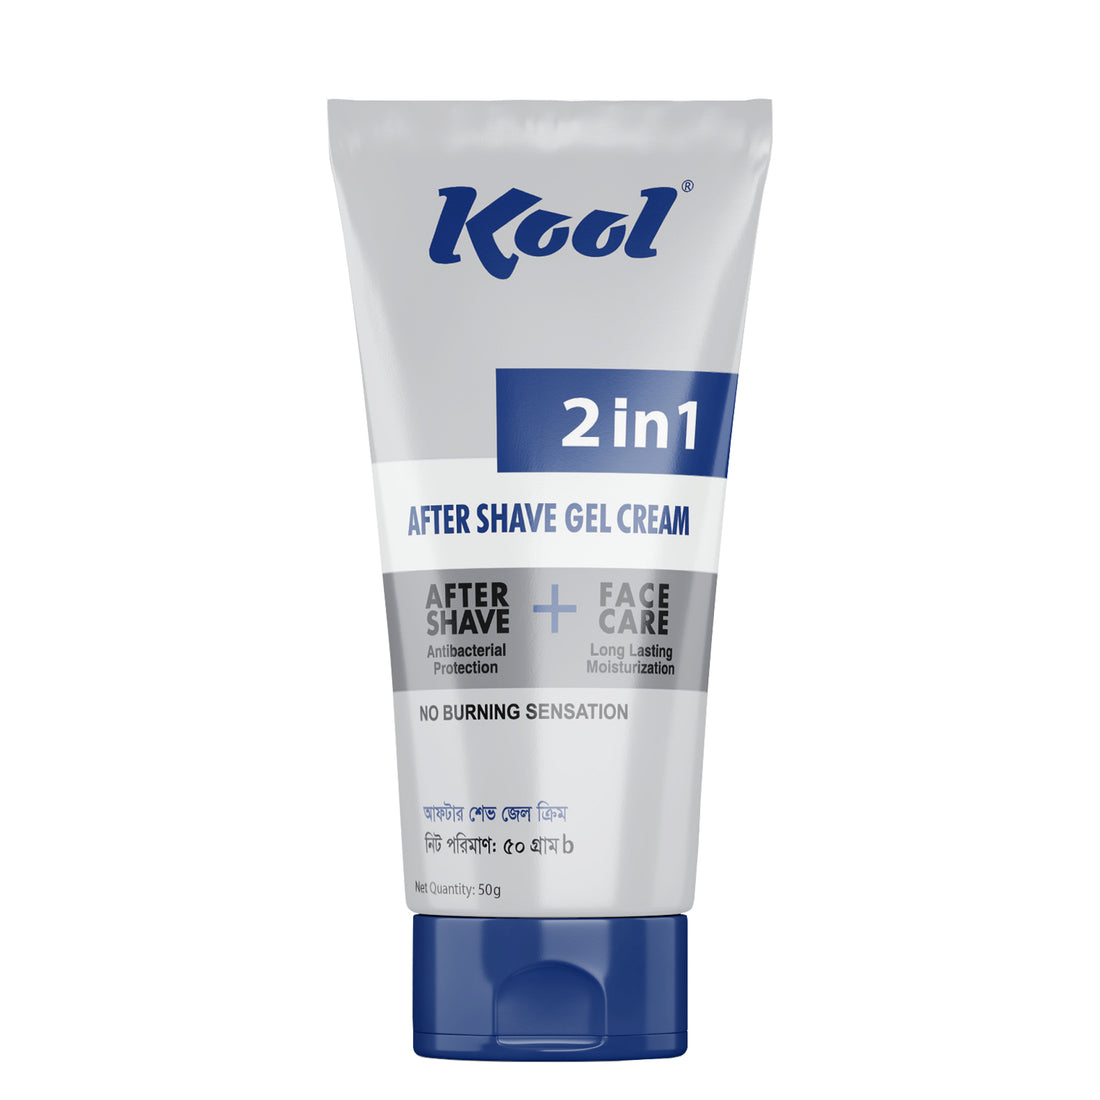 Kool 2 In 1 After Shave Gel Cream (50gm)